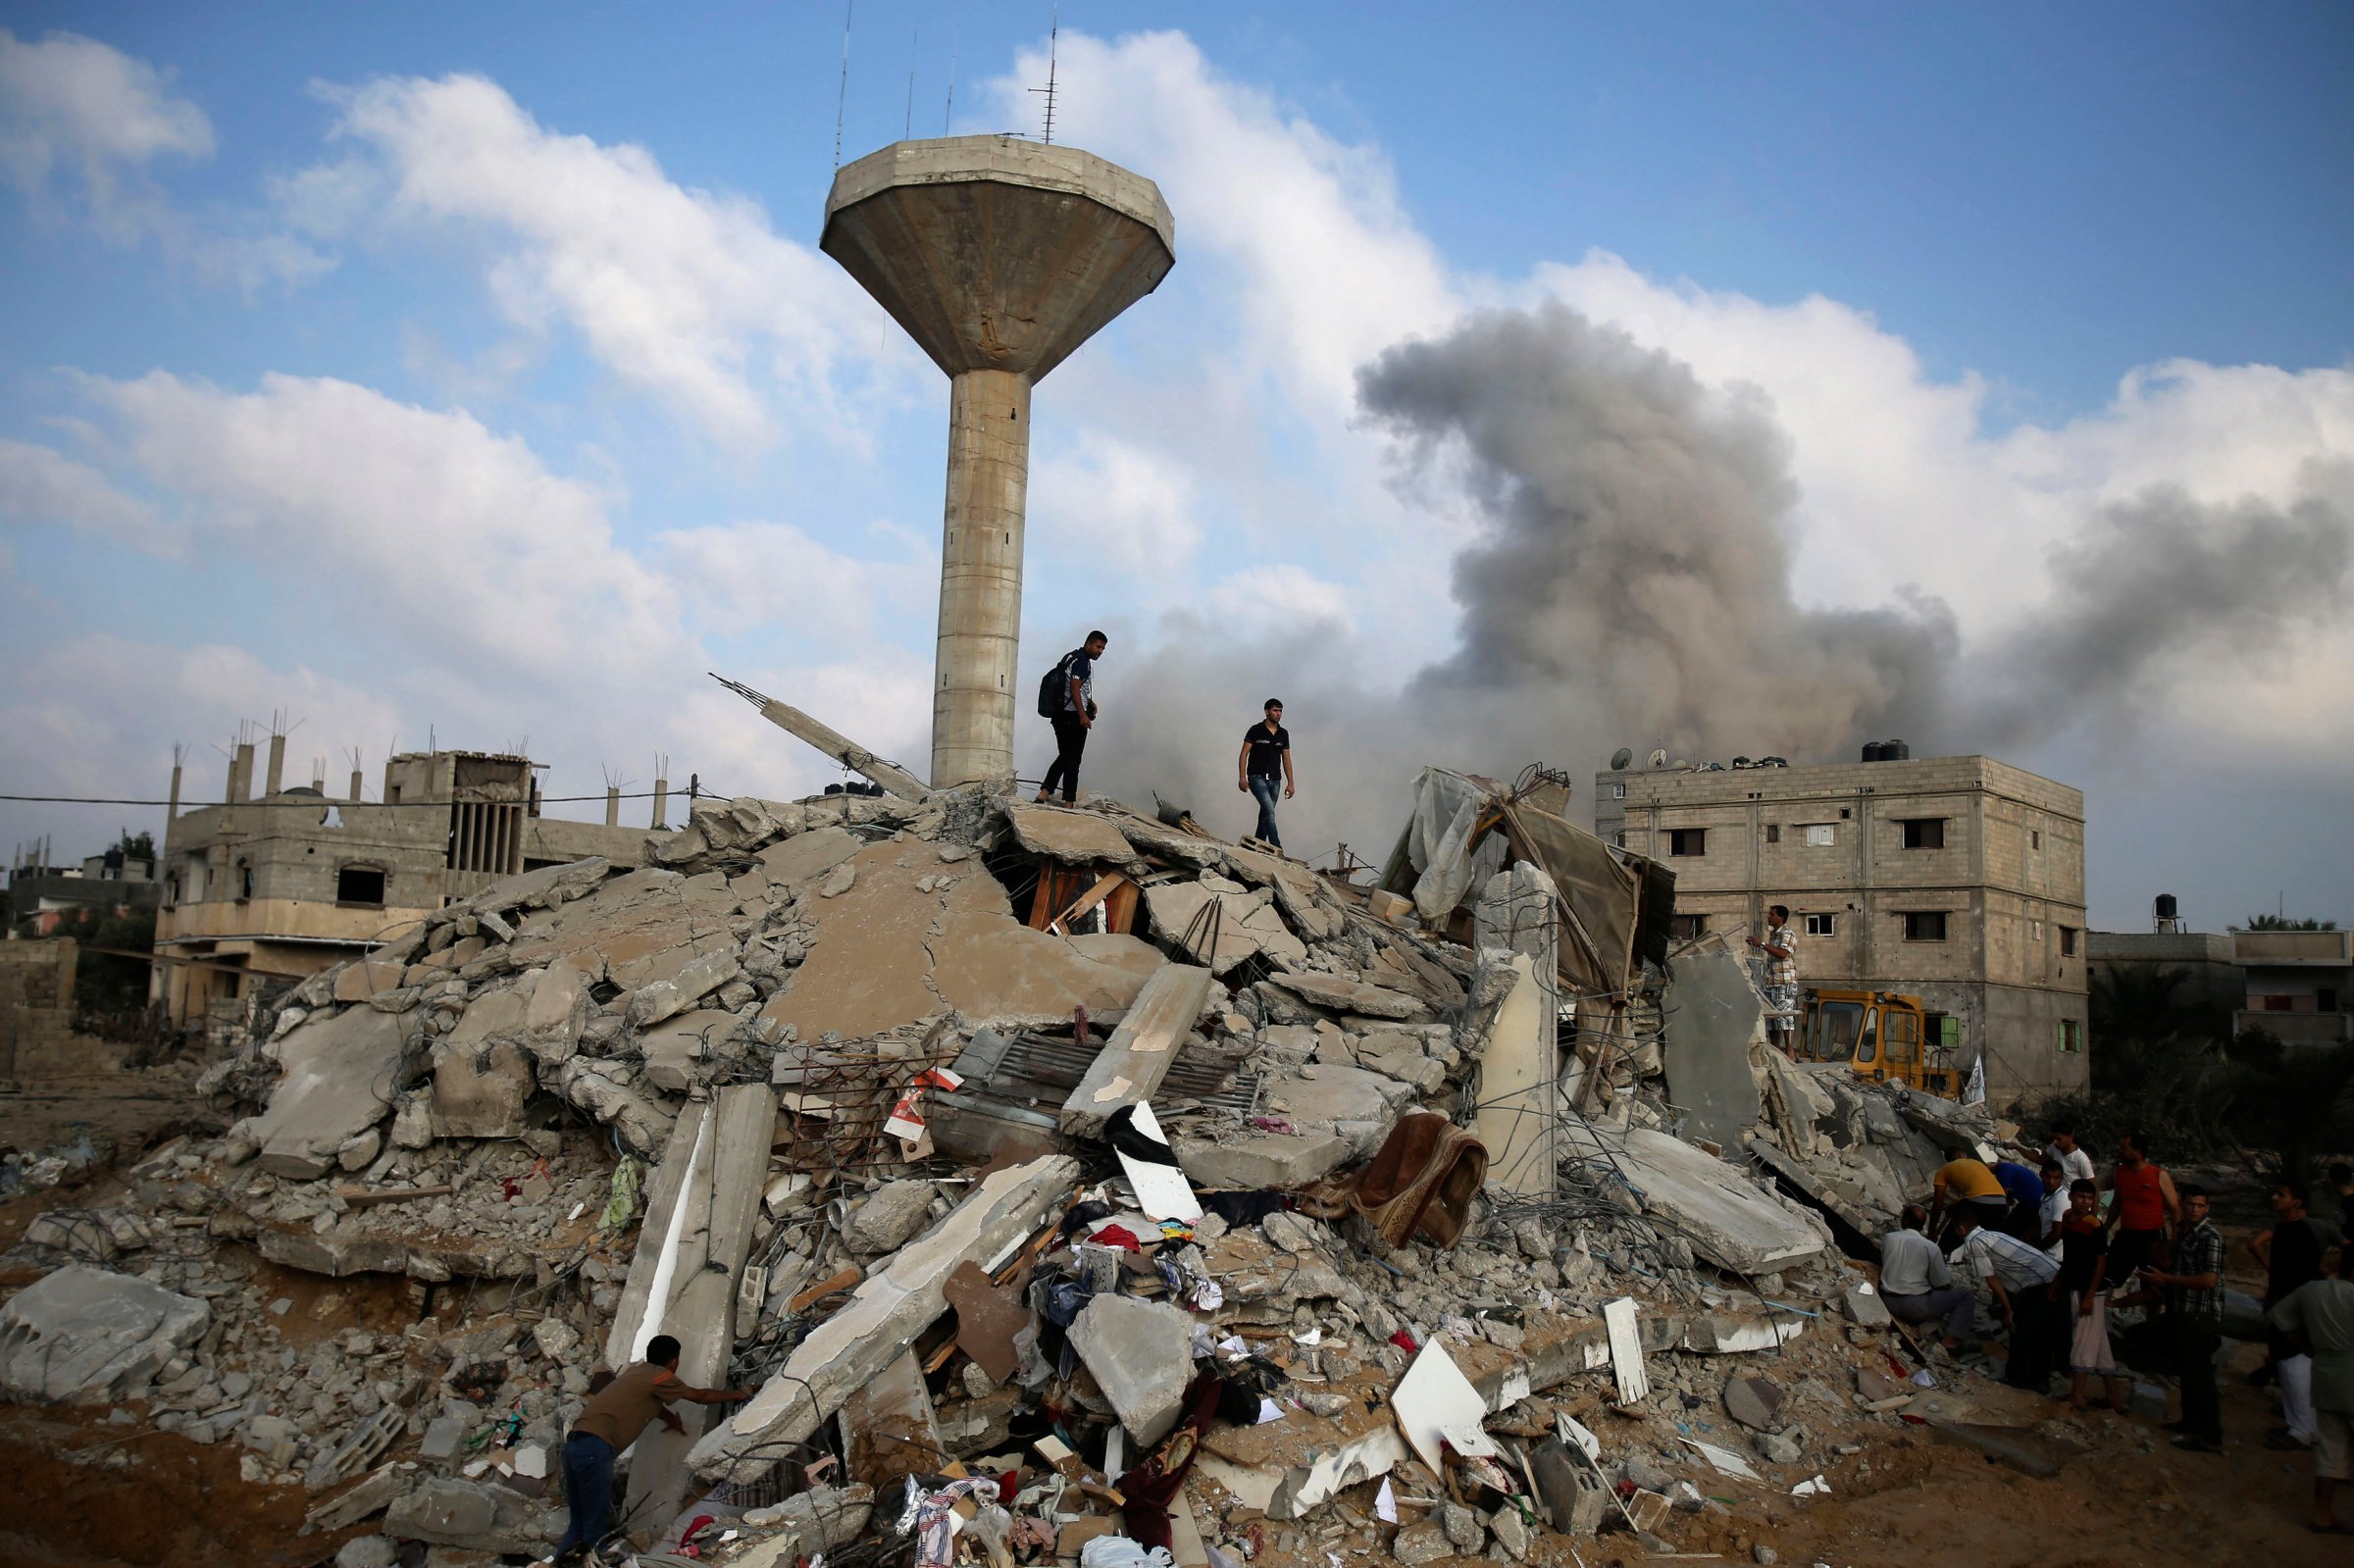 Palestinians search for victims as people gather atop the remains of a house, which witnesses said was destroyed in an Israeli air strike, in Rafah in the southern Gaza Strip on July 29, 2014.